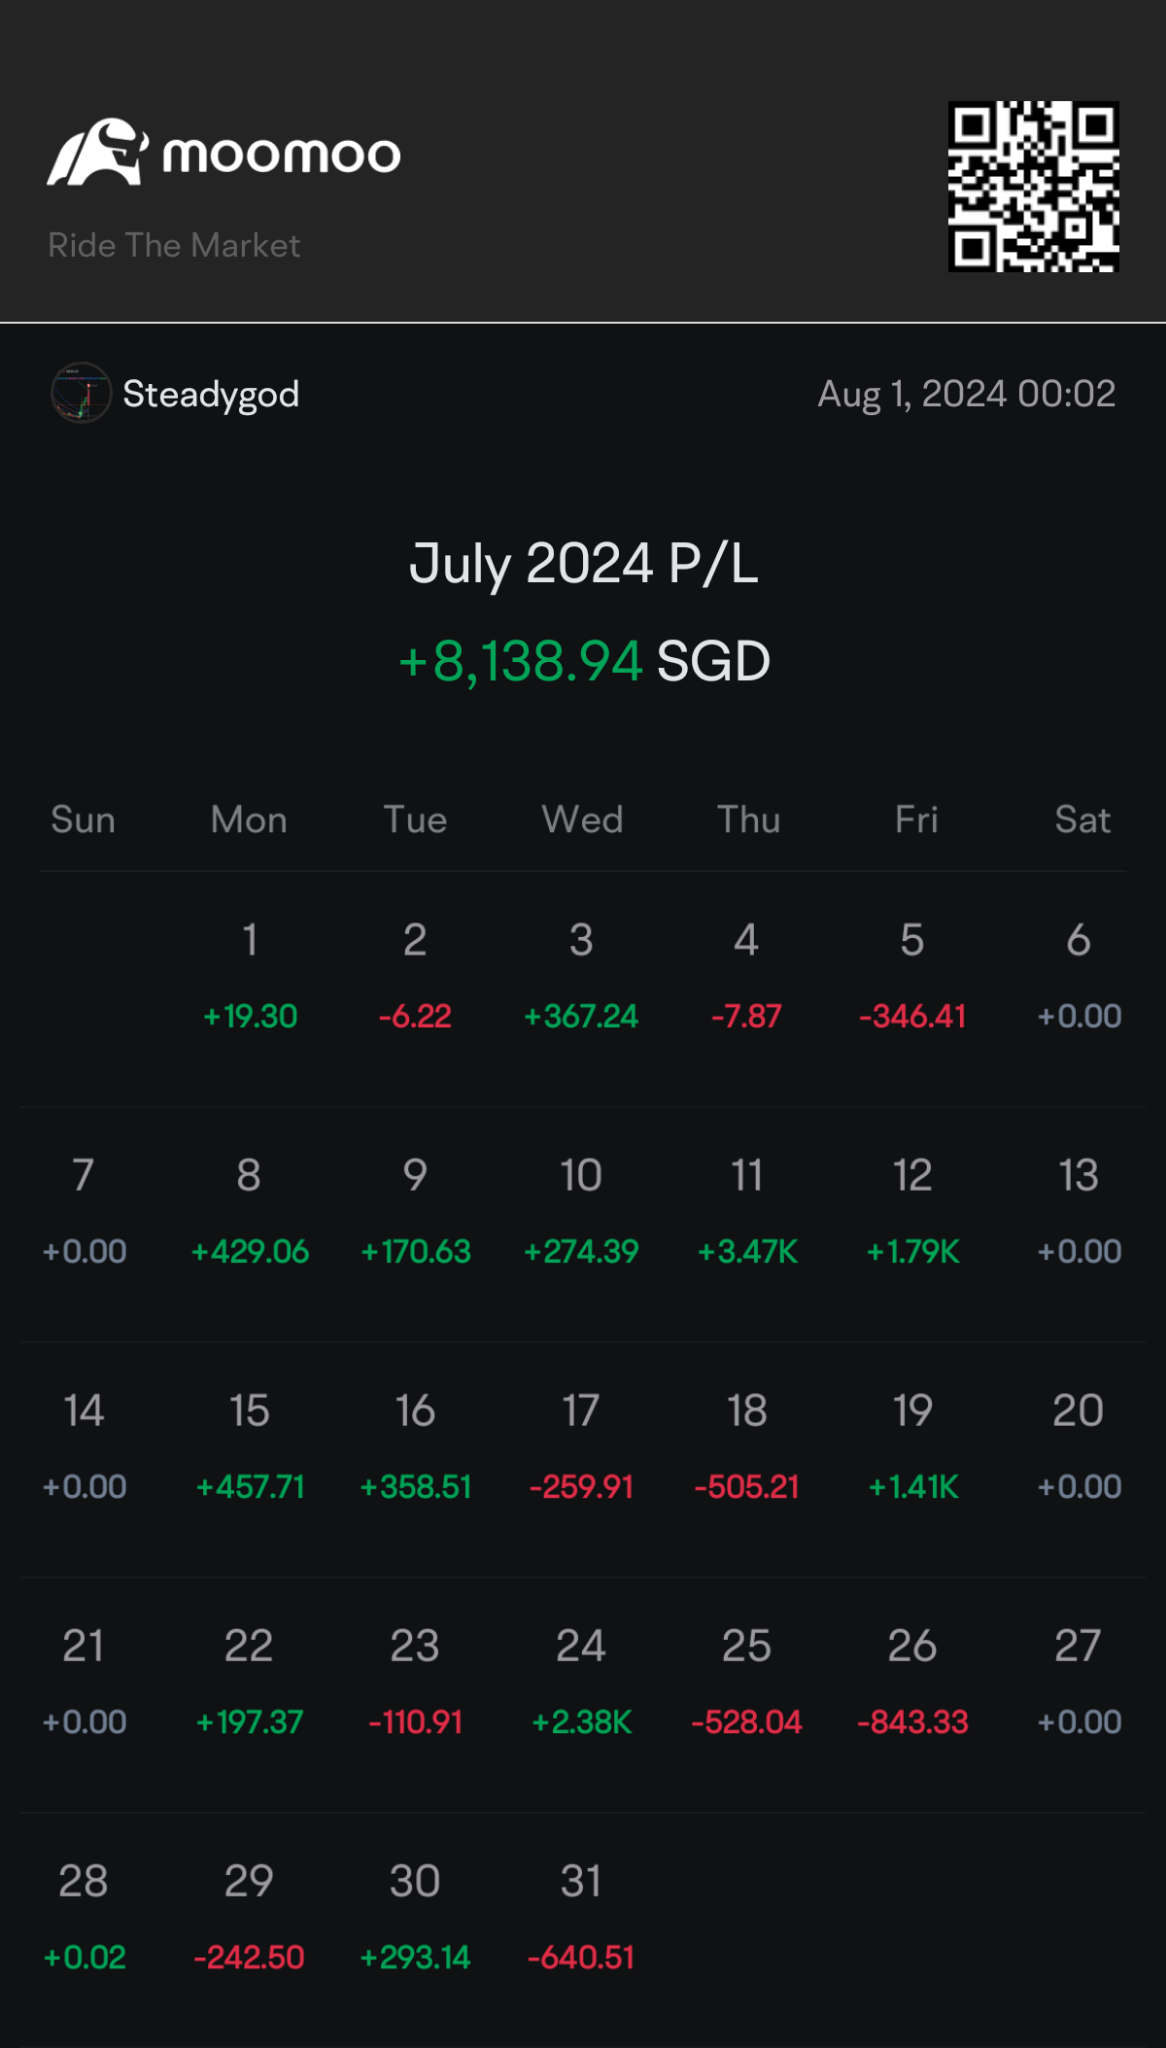 $1,000 average size daily option trade, up roughly 8x for July.  Early July is pretty smooth until the last week, market become really choppy with earnings repo...